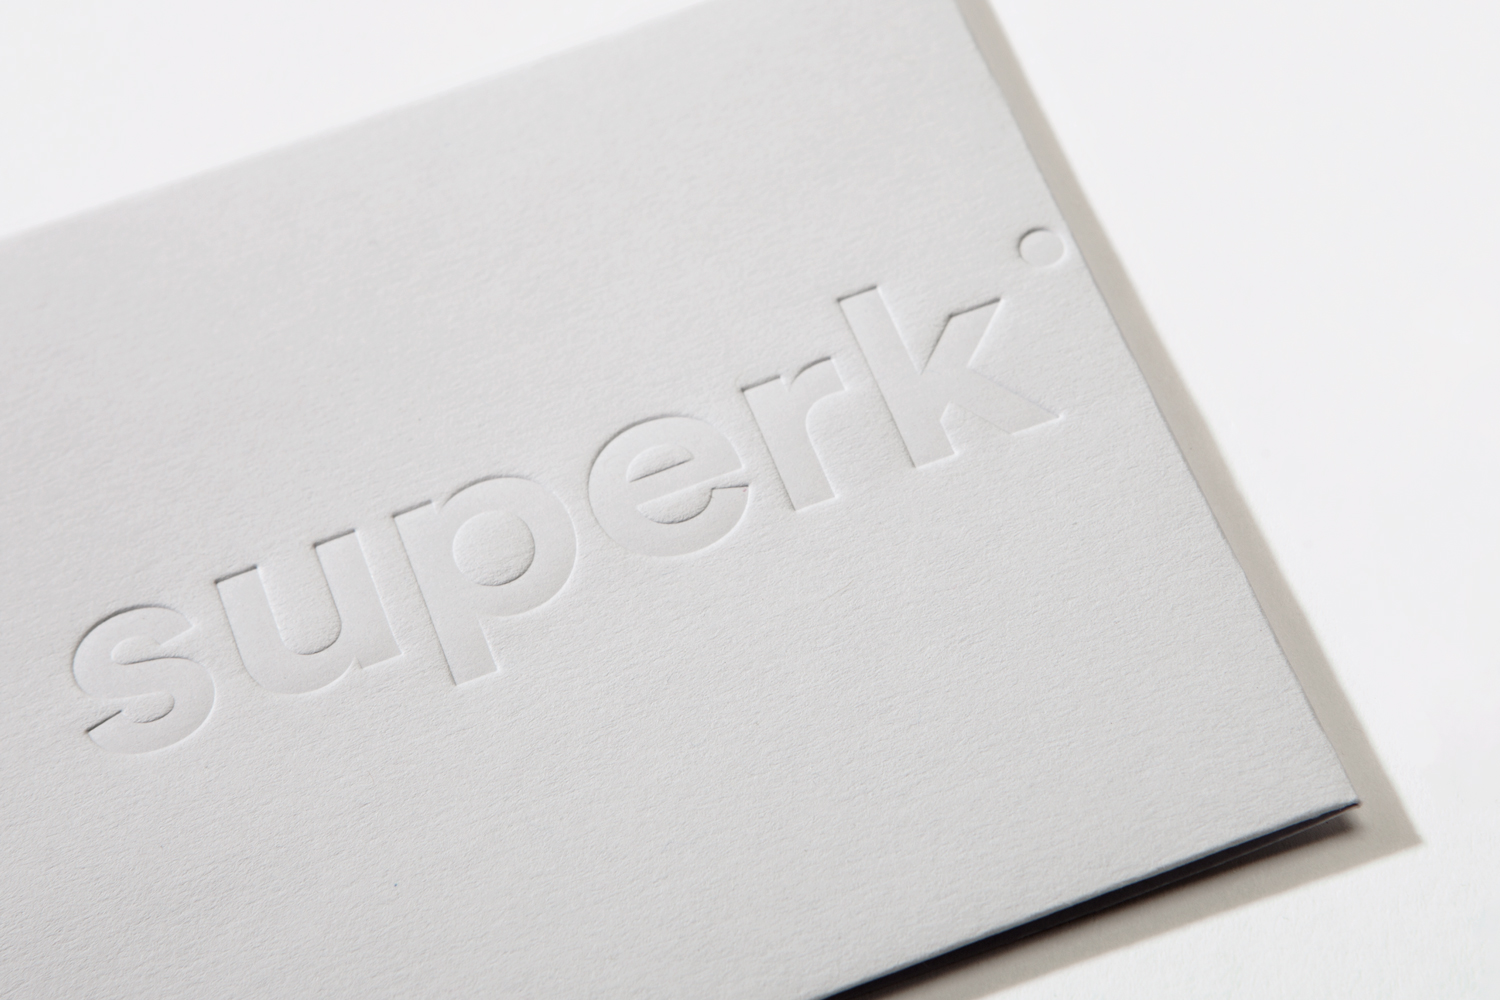 Brand identity and blind embossed envelope by Toronto-based graphic design studio Blok for Canadian architecture firm Superkül